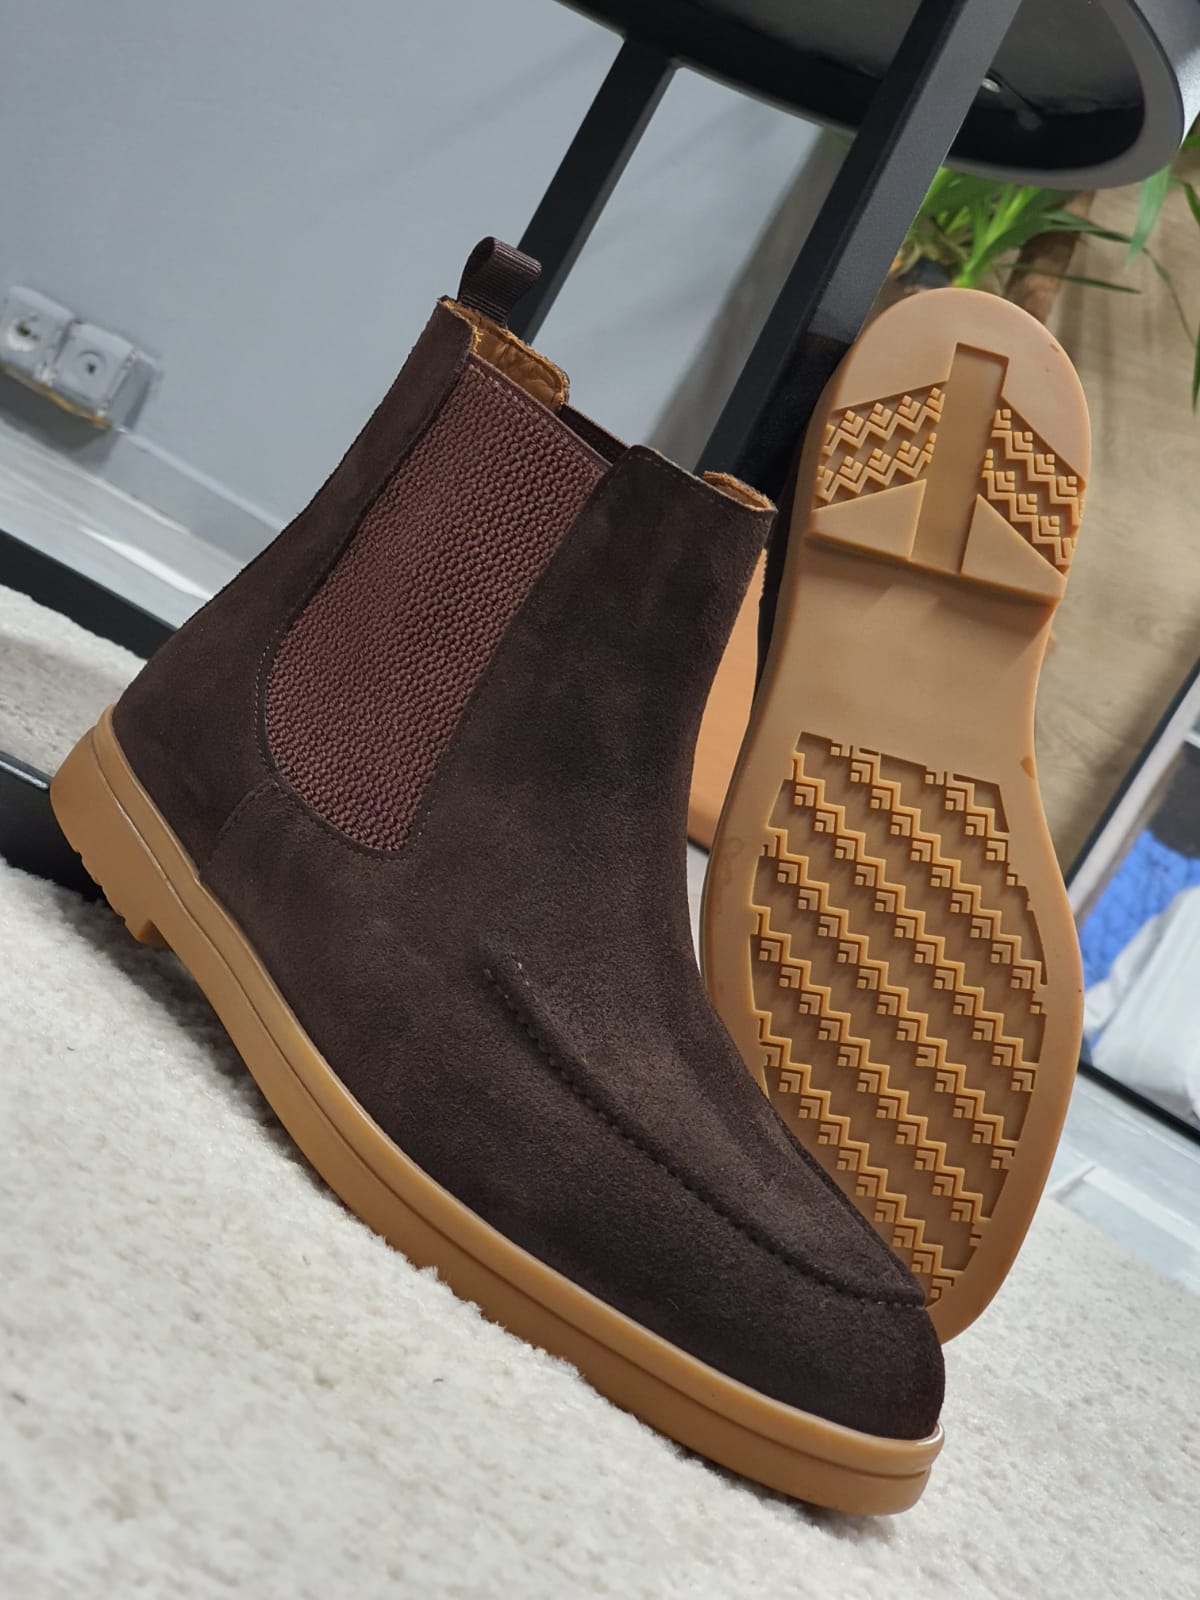 SARDINELLI BROWN SUEDE SPECIAL PRODUCTION* CALF LEATHER BOOTS